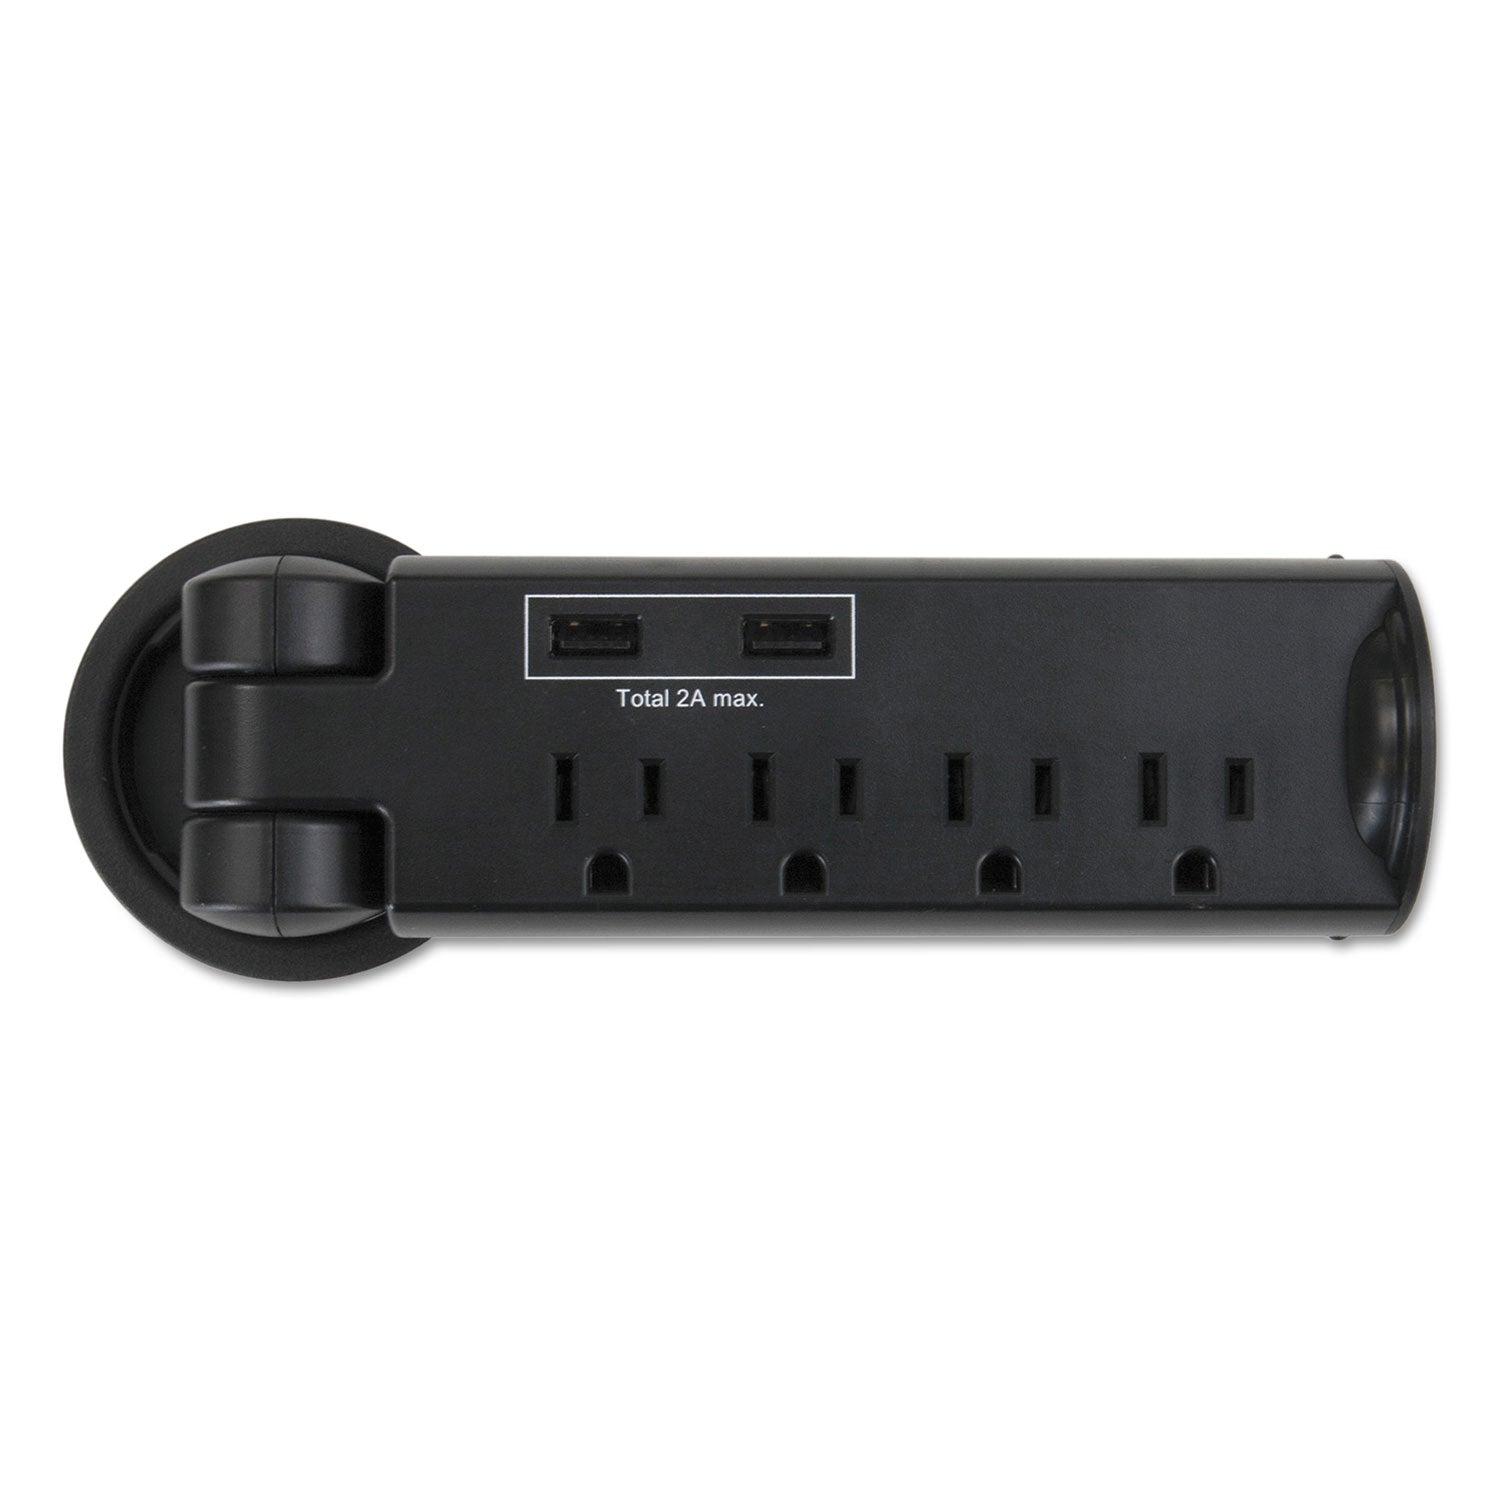 Pull-Up Power Module, 4 Outlets, 2 USB Ports, 8 ft Cord, Black - 